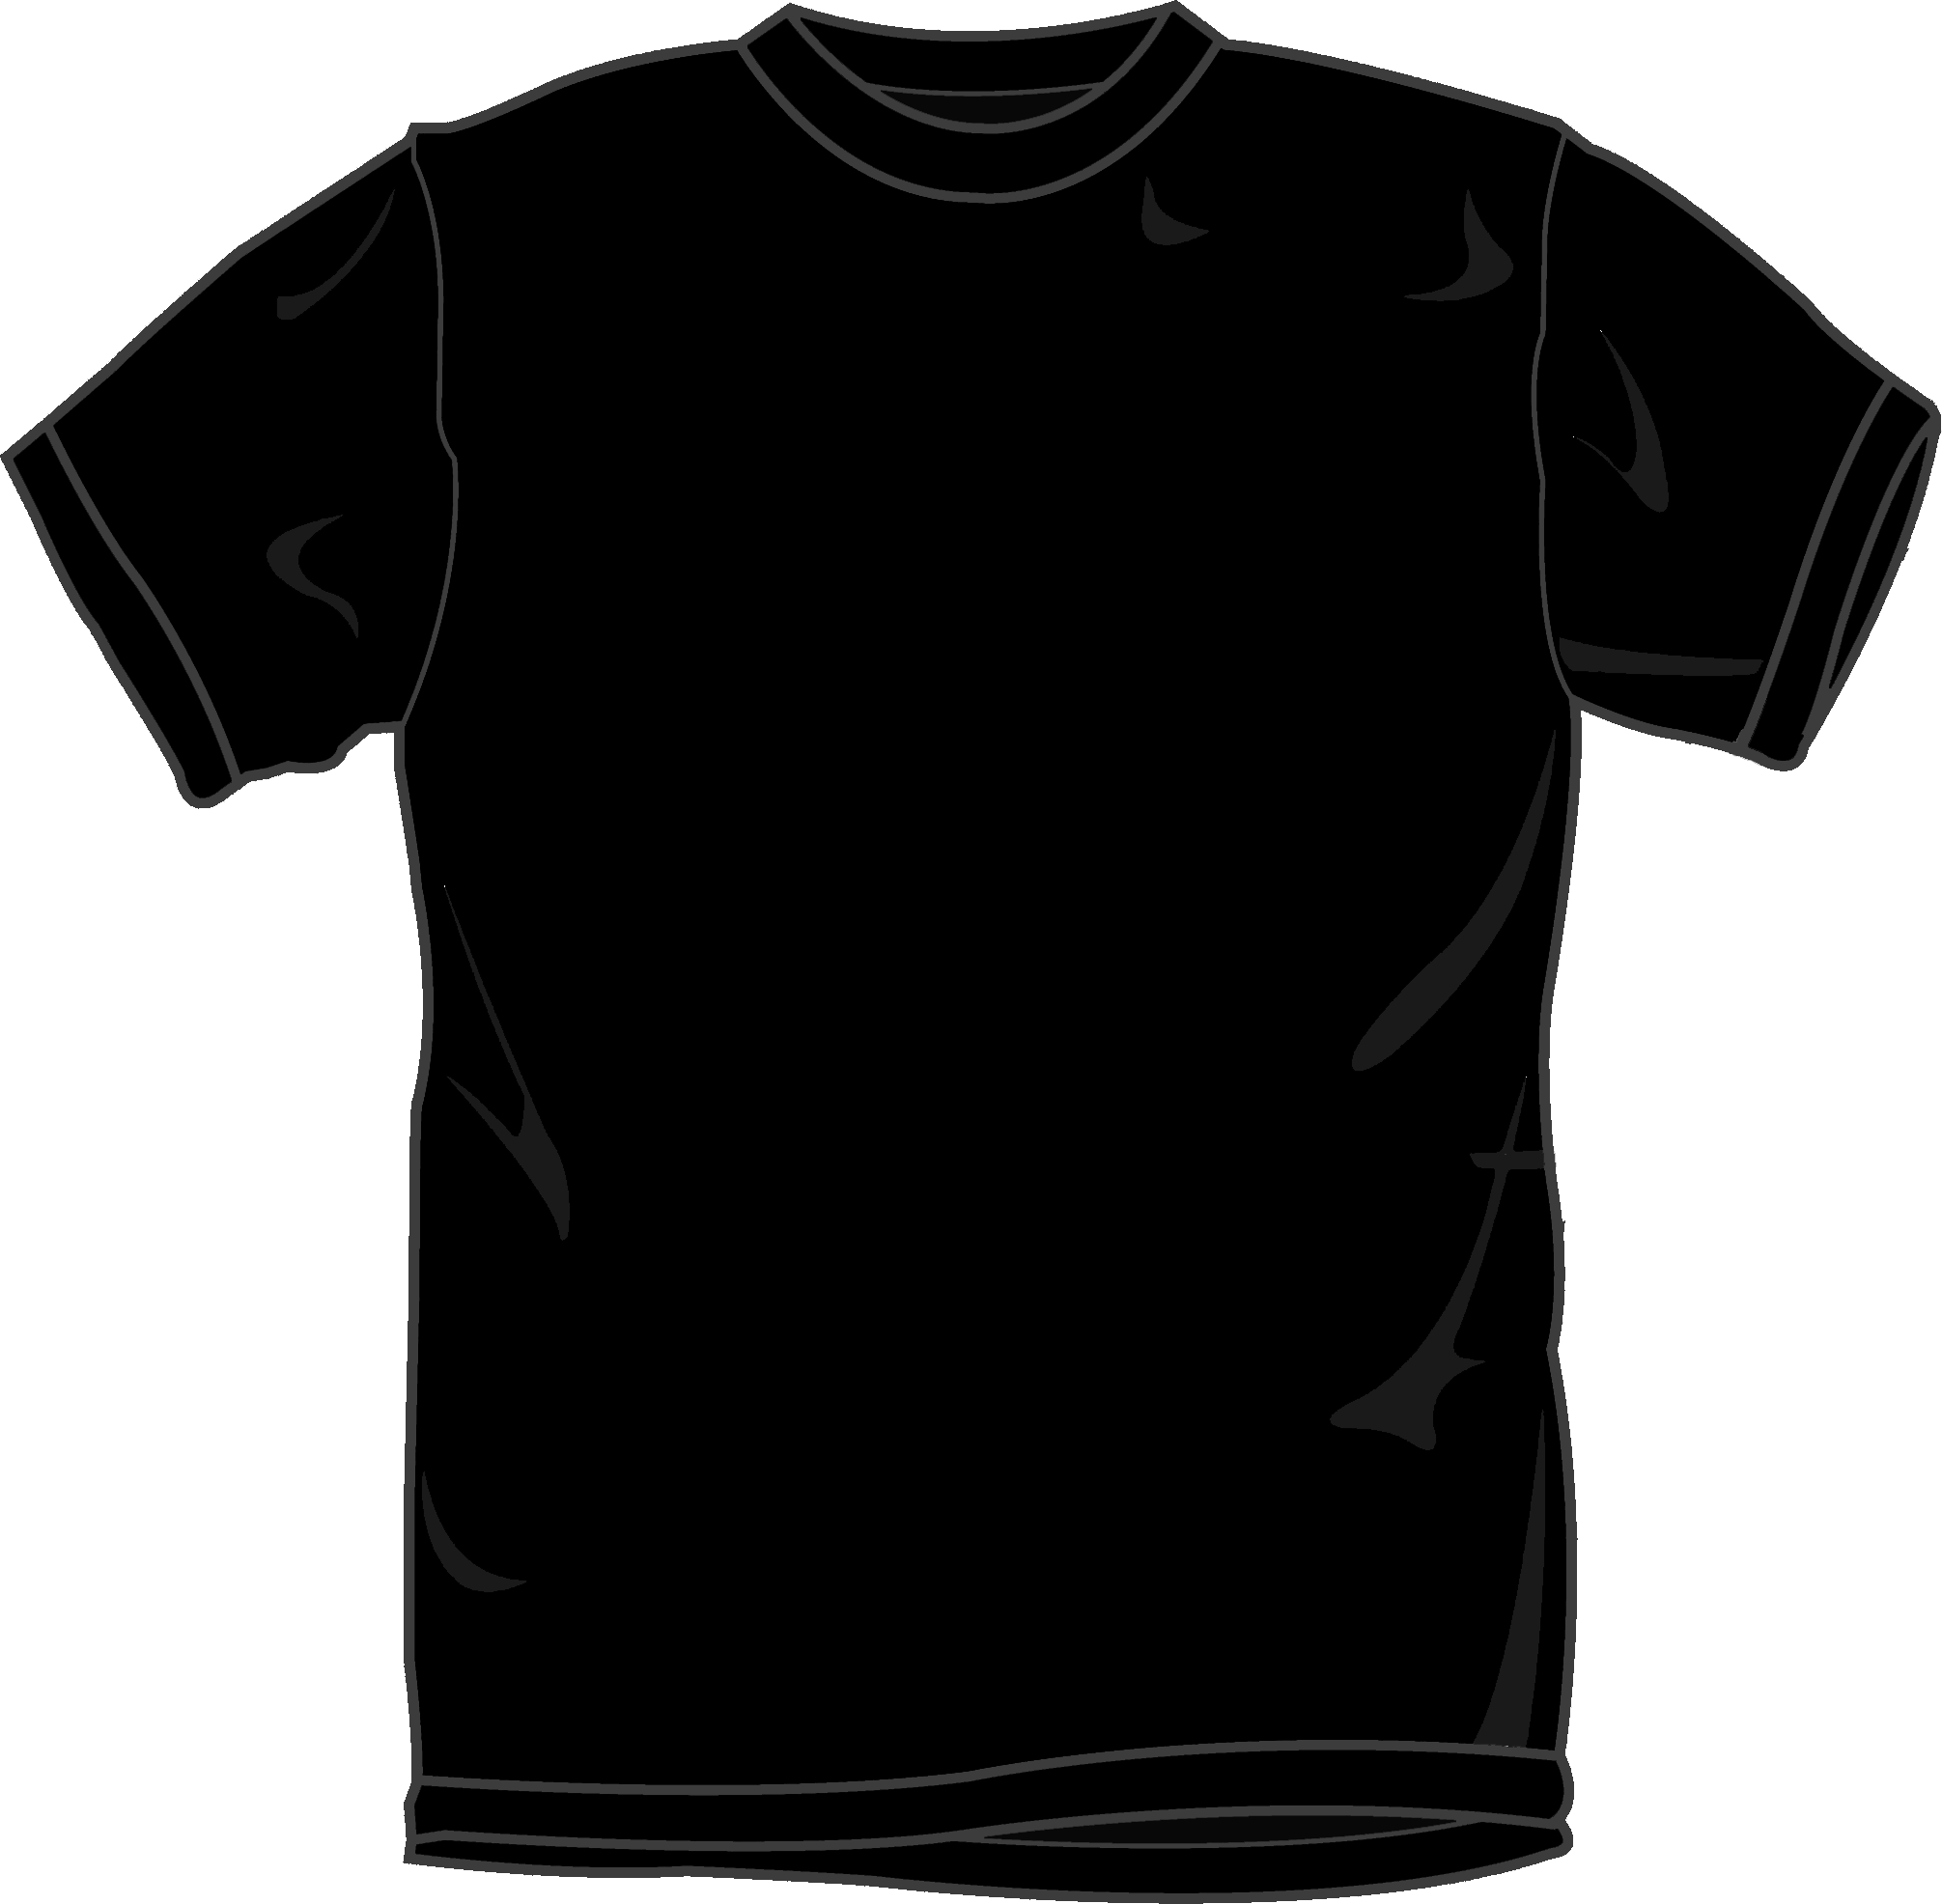 Black T Shirt Template Front Clipart Free to use Clip